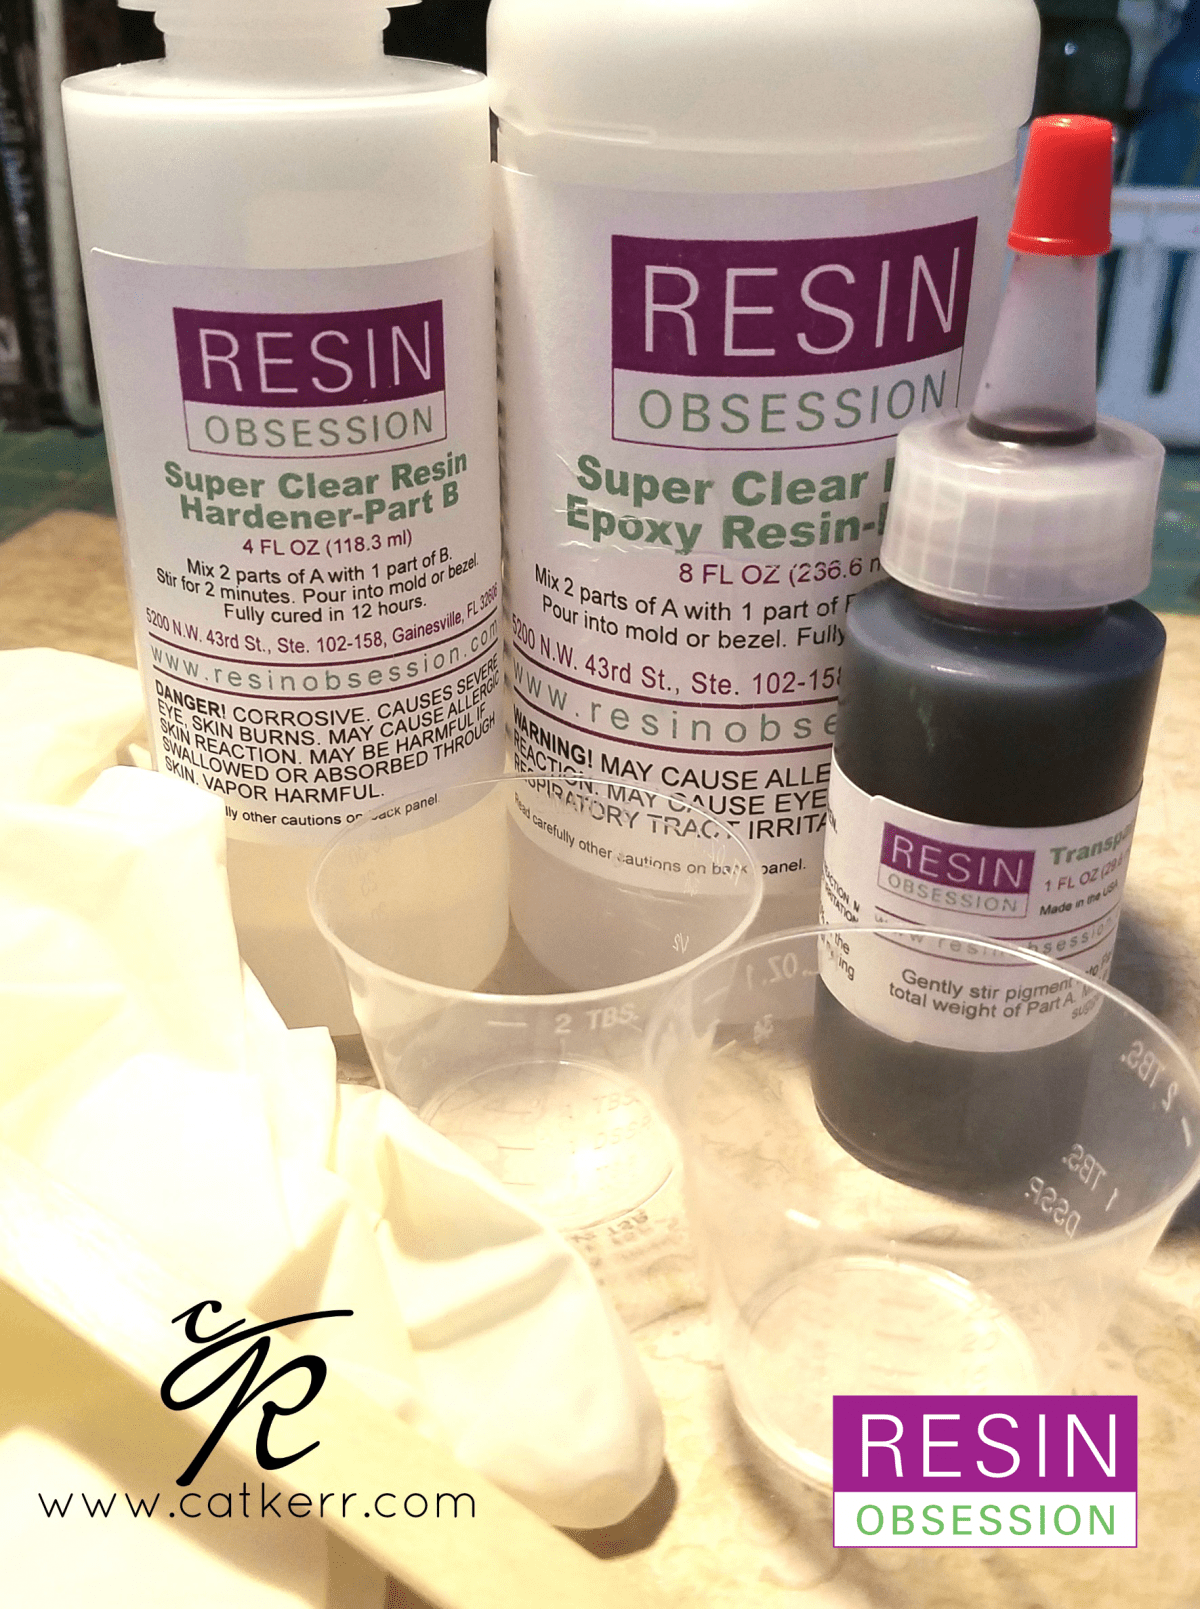 Bottles of two-part resin and supplies